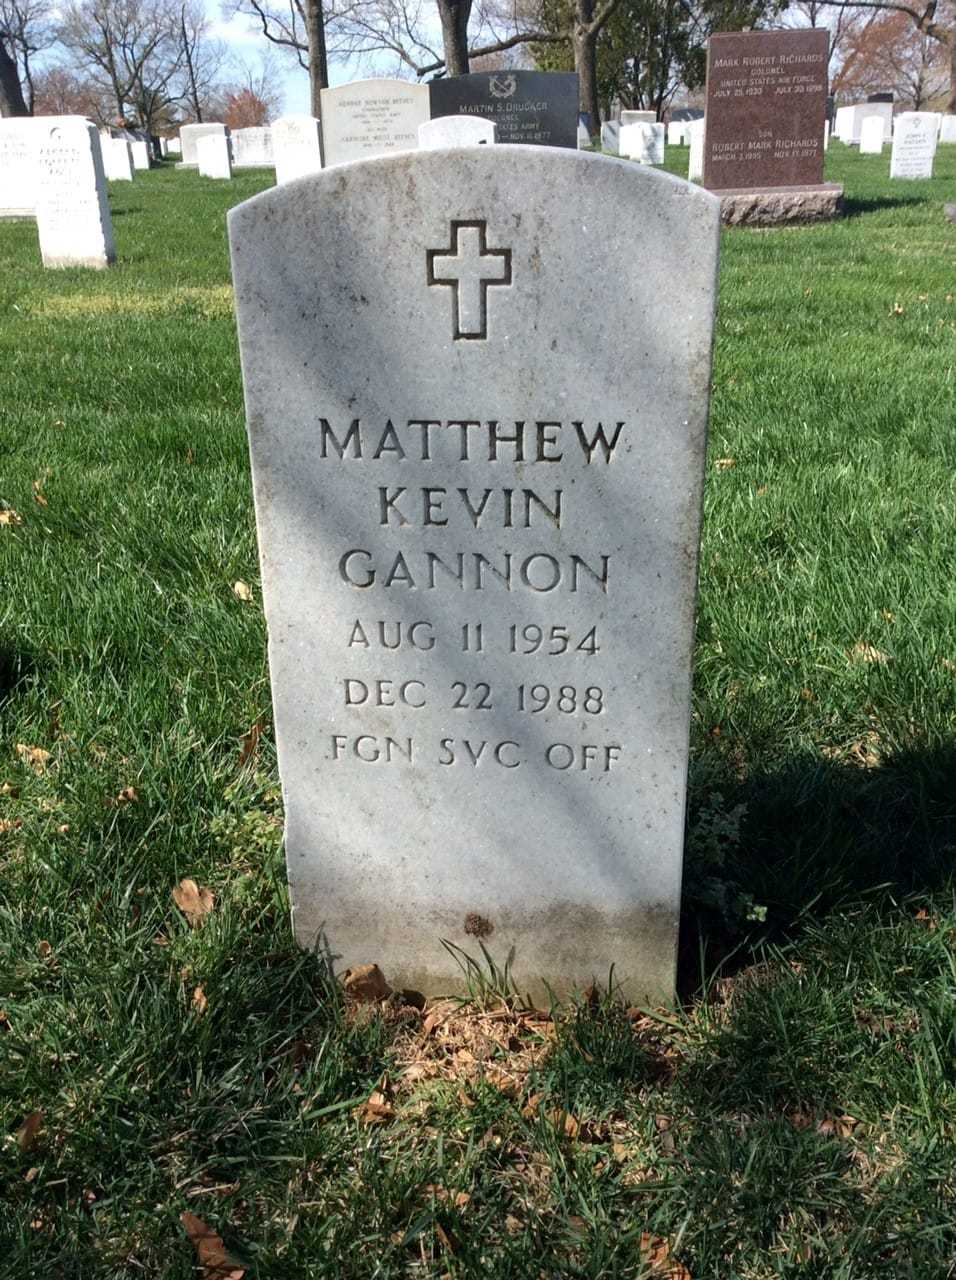 A close up of a tombstone in a semetary inscribed with his name, "Matthew Kevin Gannon," under a cross.